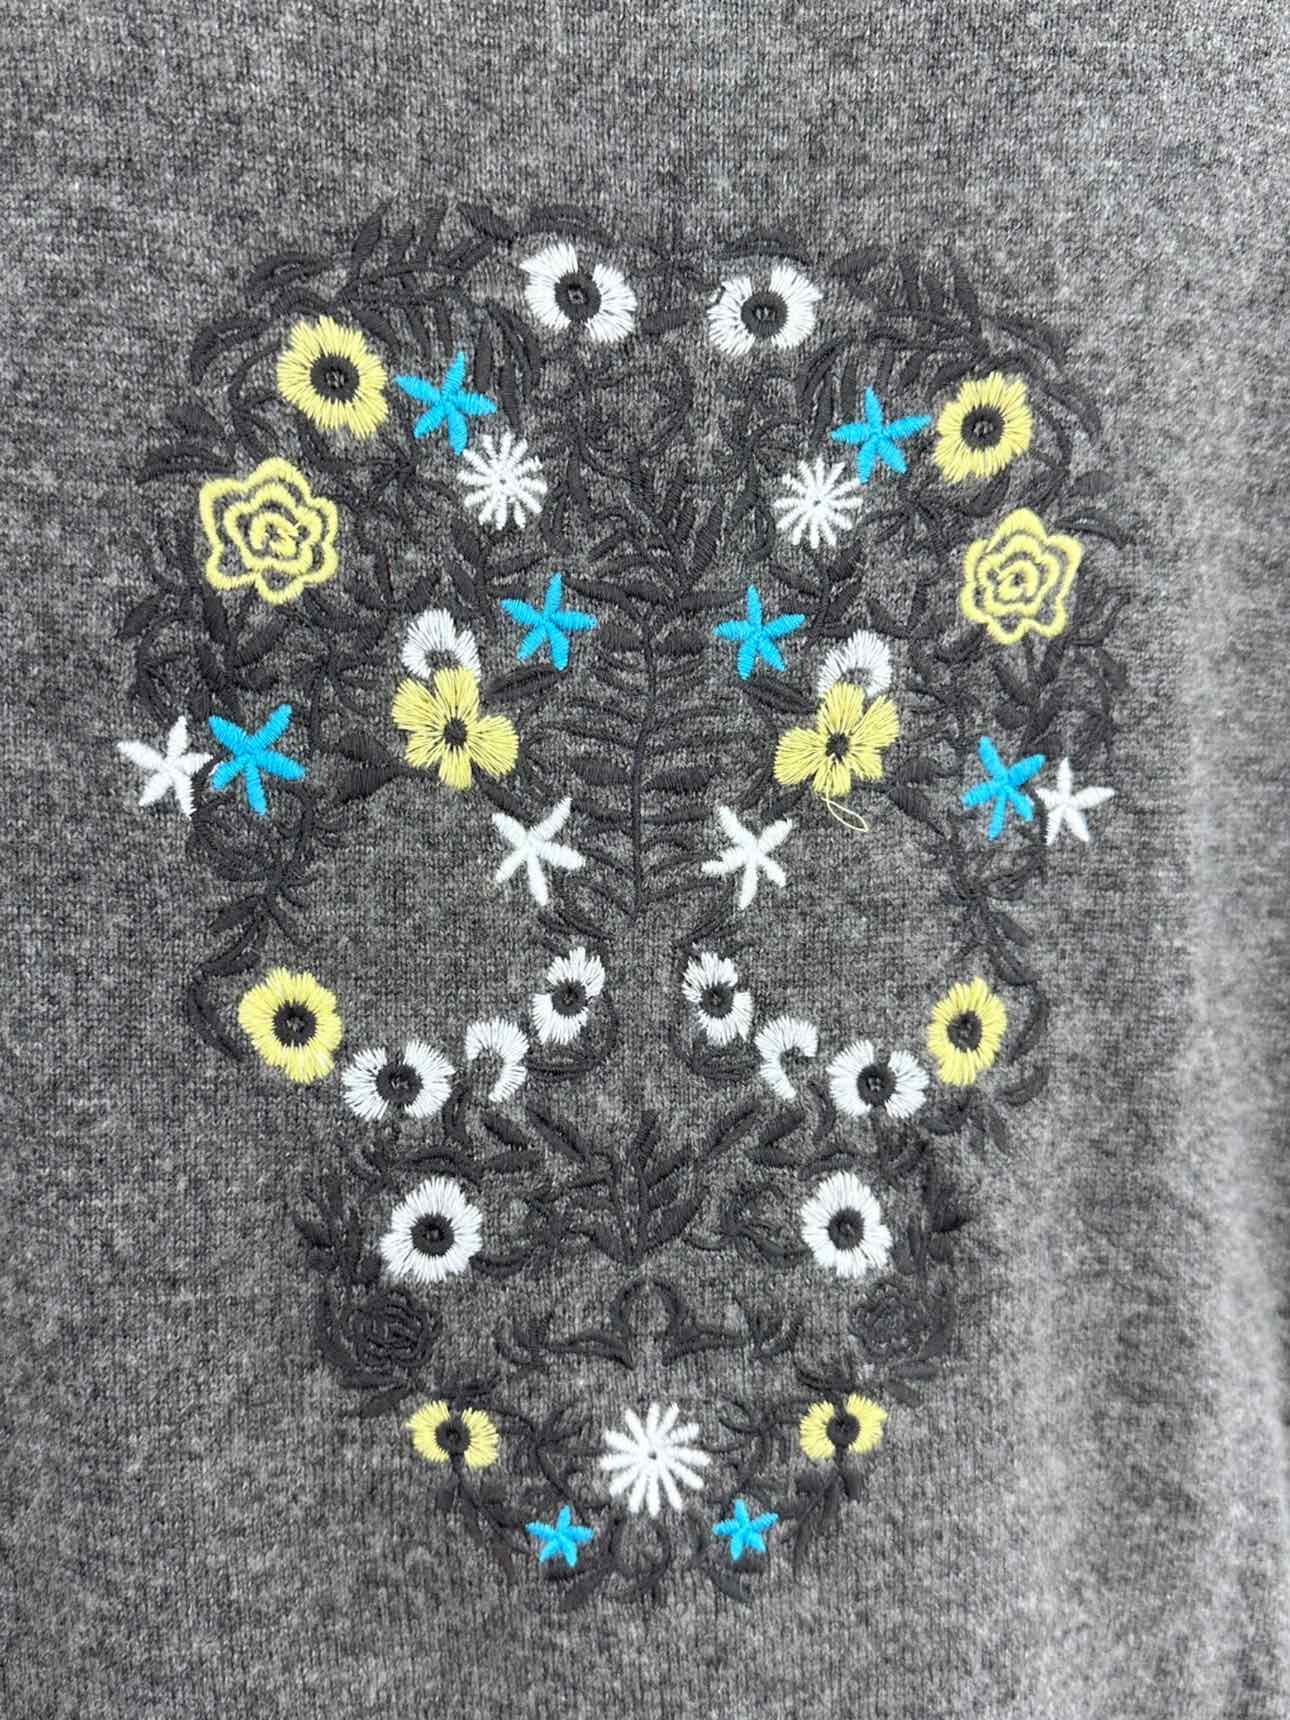 SKULL CASHMERE Gray Wool Blend Embroidered Sweater Size M